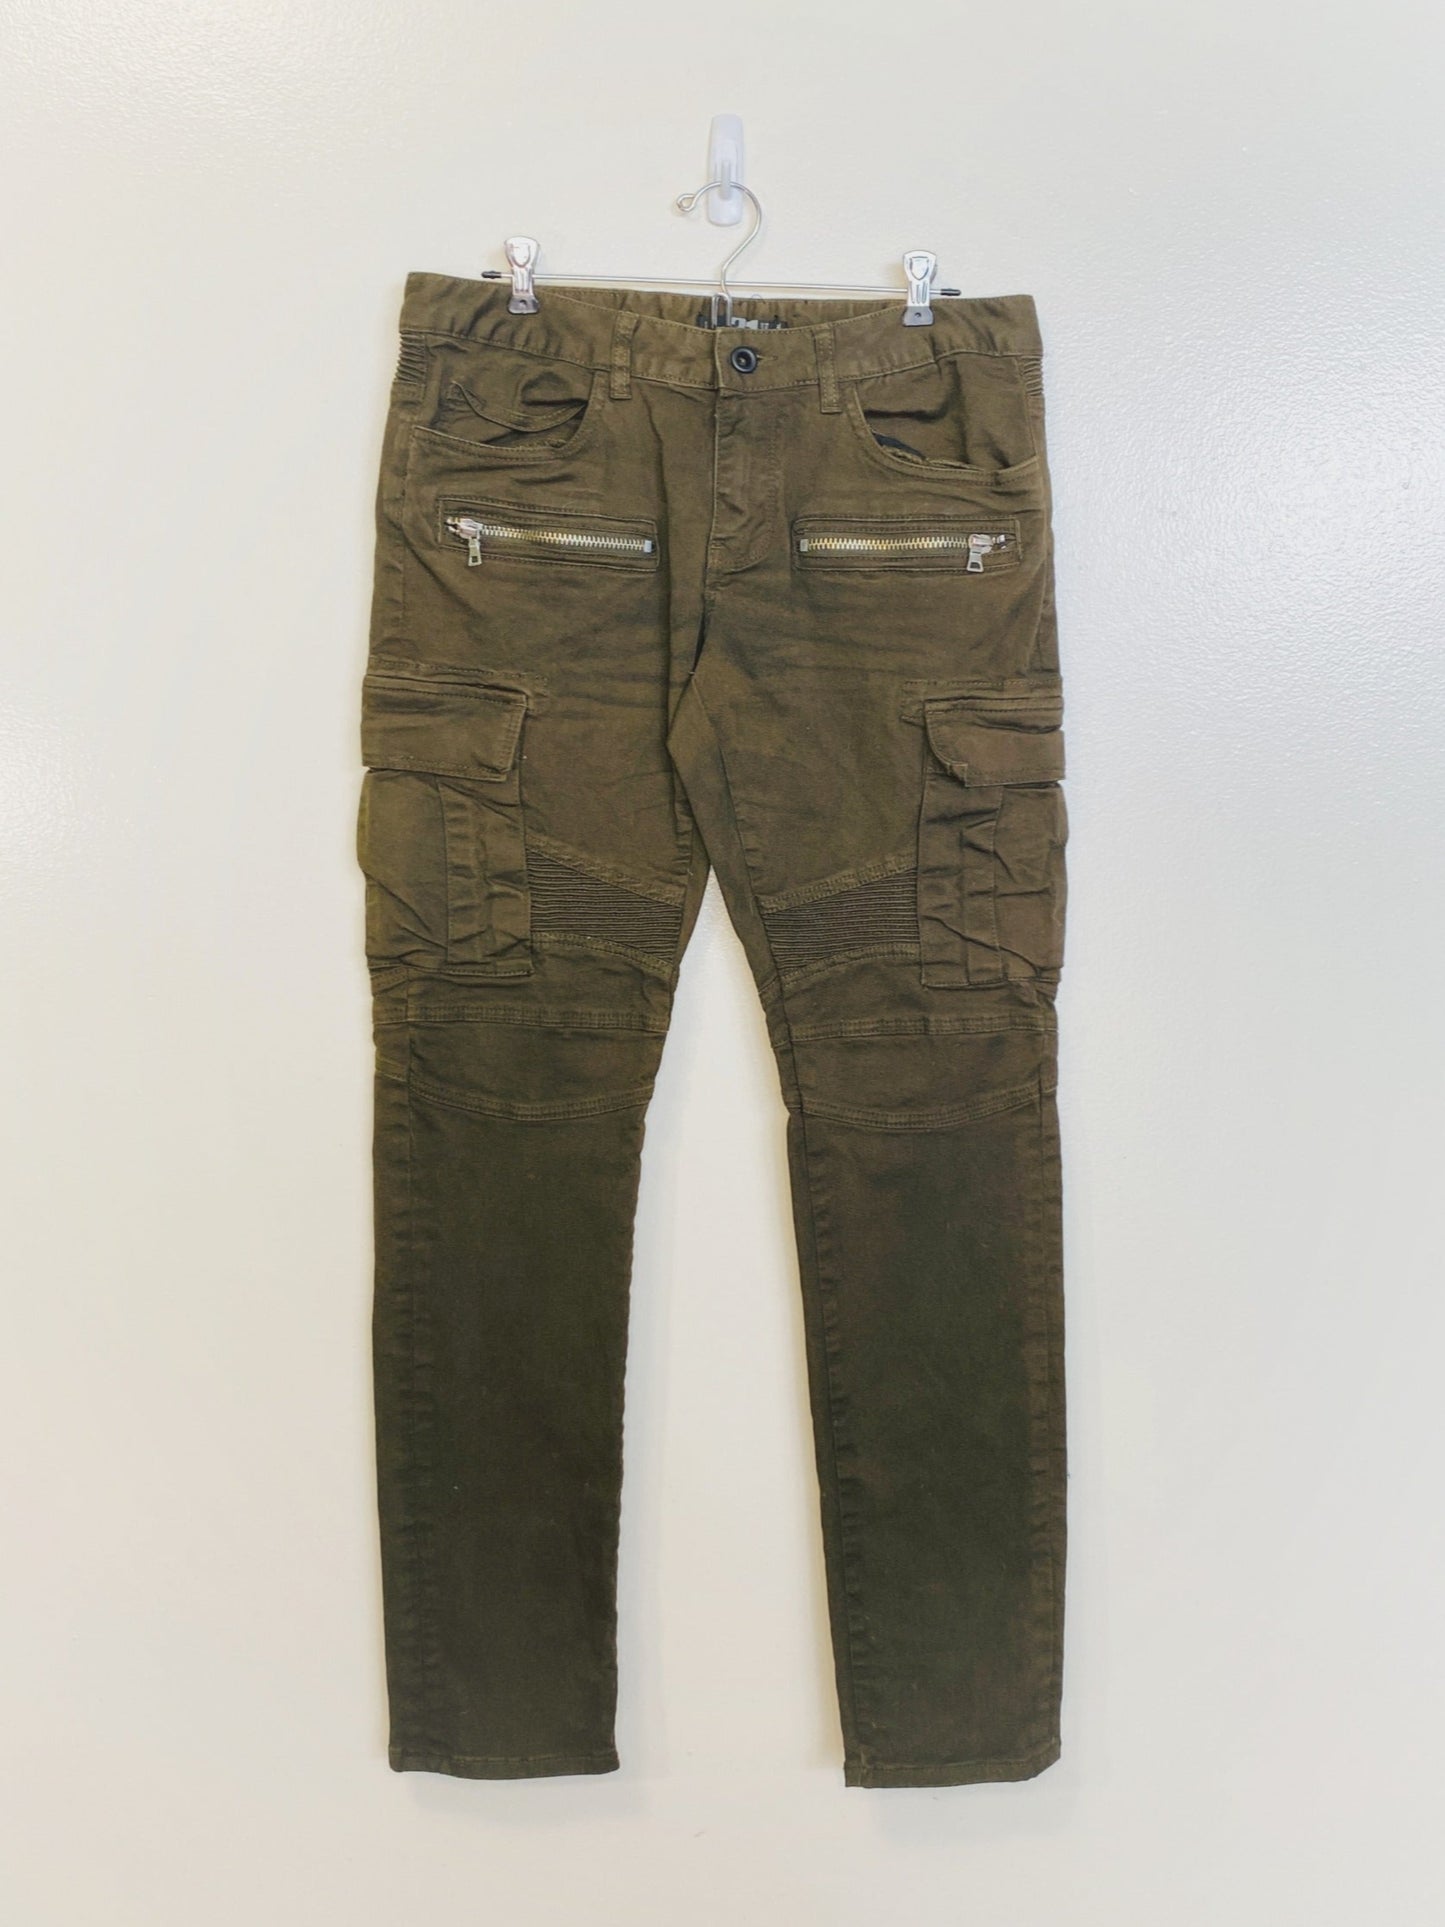 Green Textured Jeans (Size 32-34)